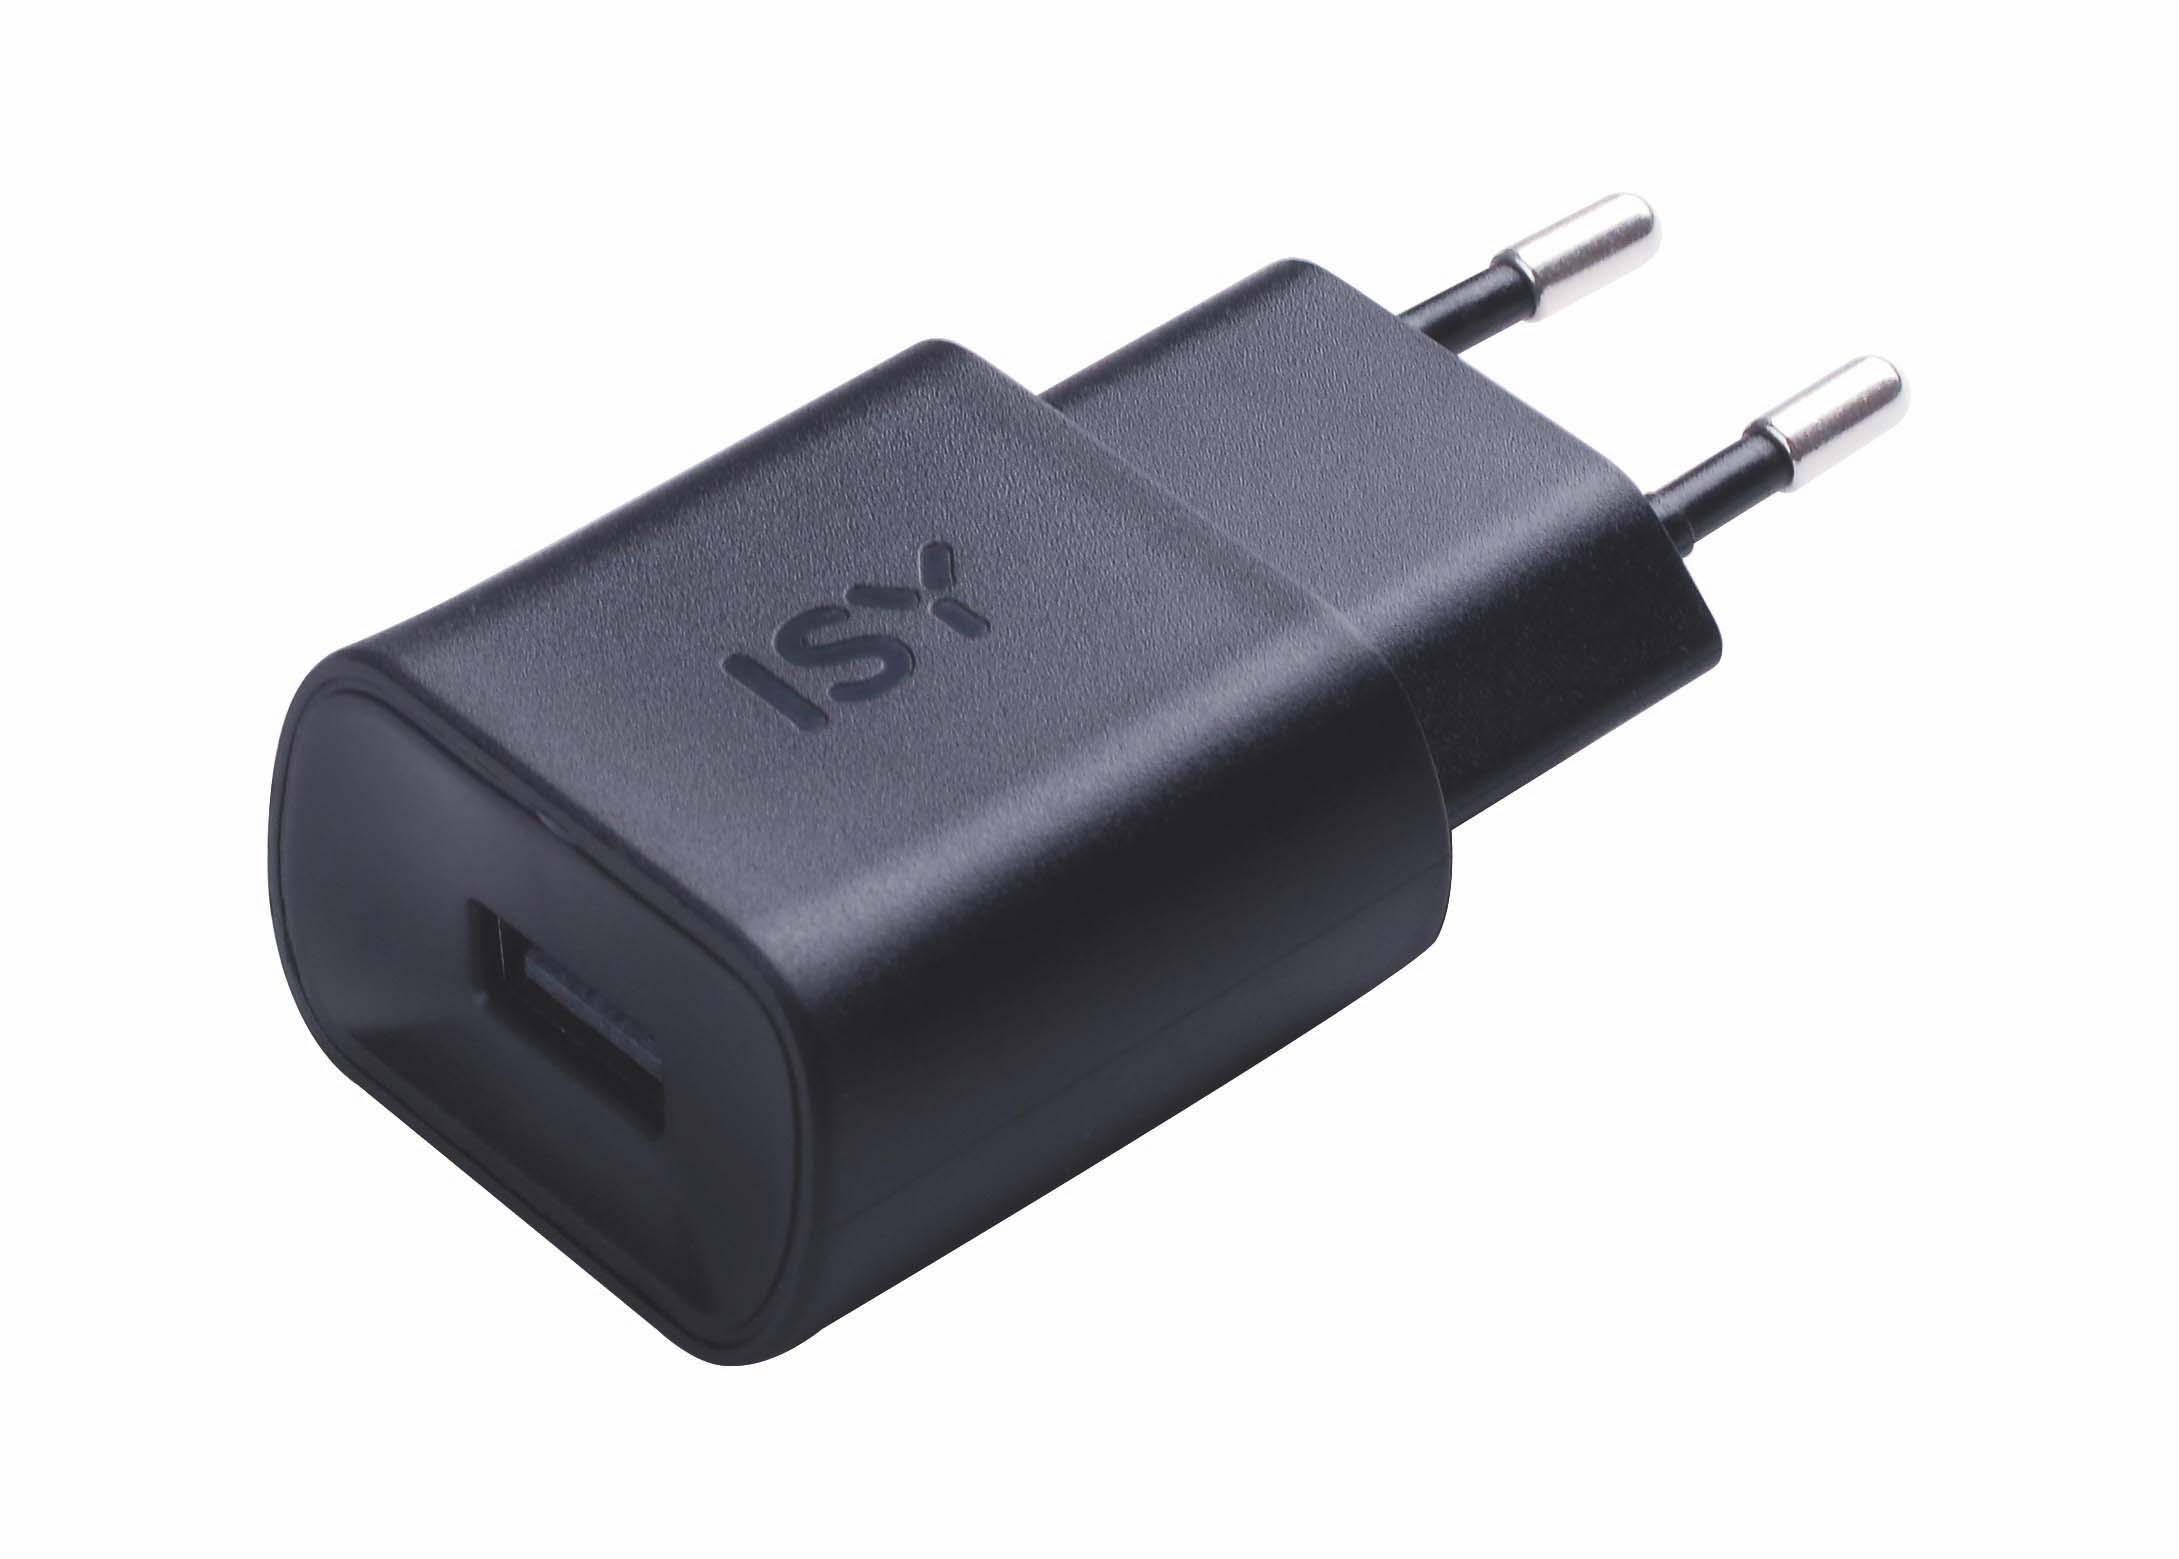 Charger Wall Wall USB USB Charger ISY 1.2 A